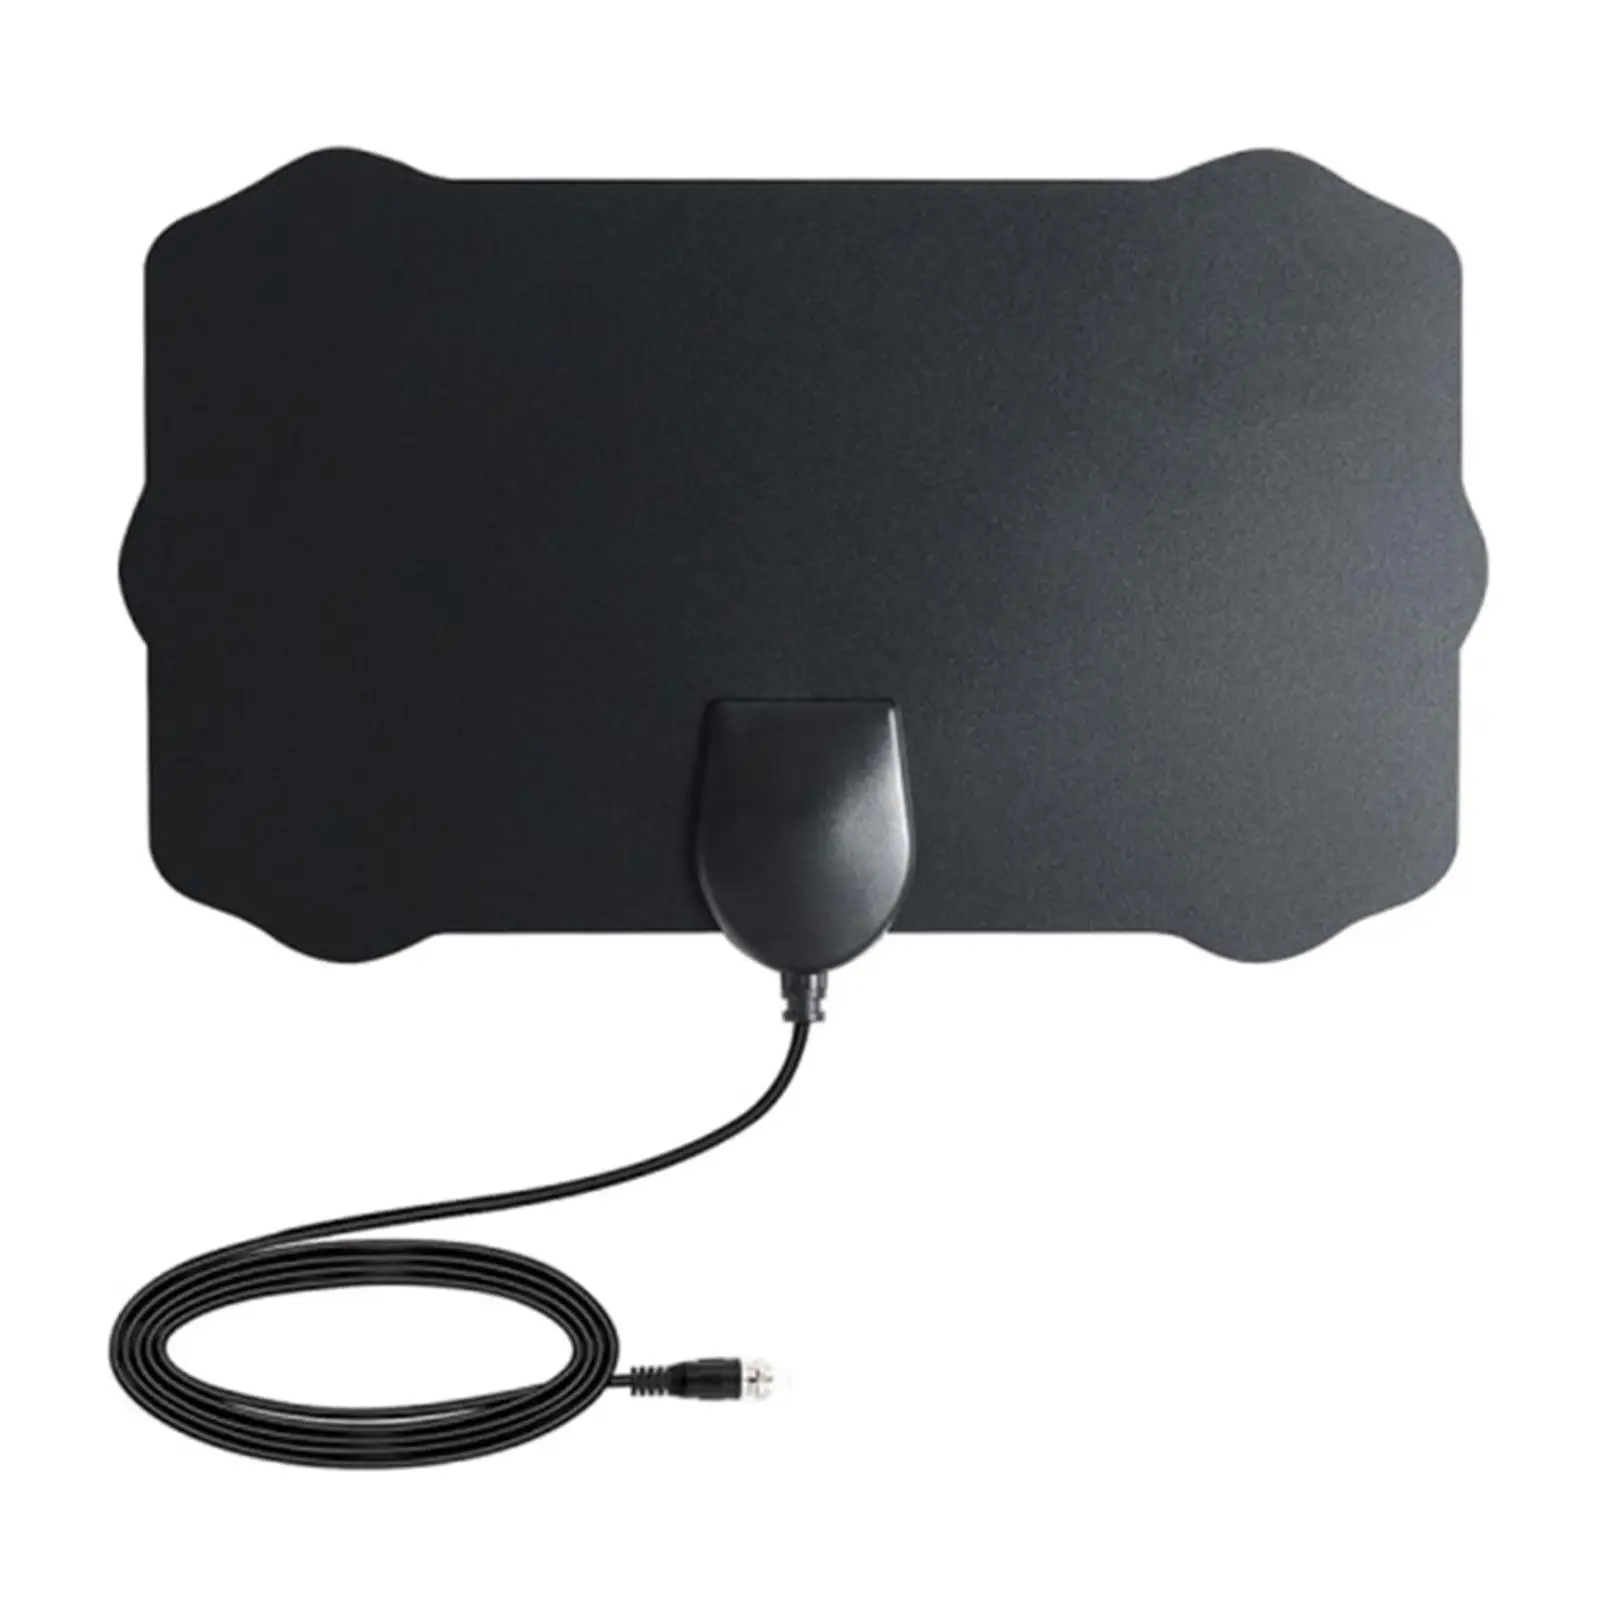 Digital TV Antenna Indoor HDTV Antenna Mini HDTV Signal Receiver with Coax Cable for Free Channels Black